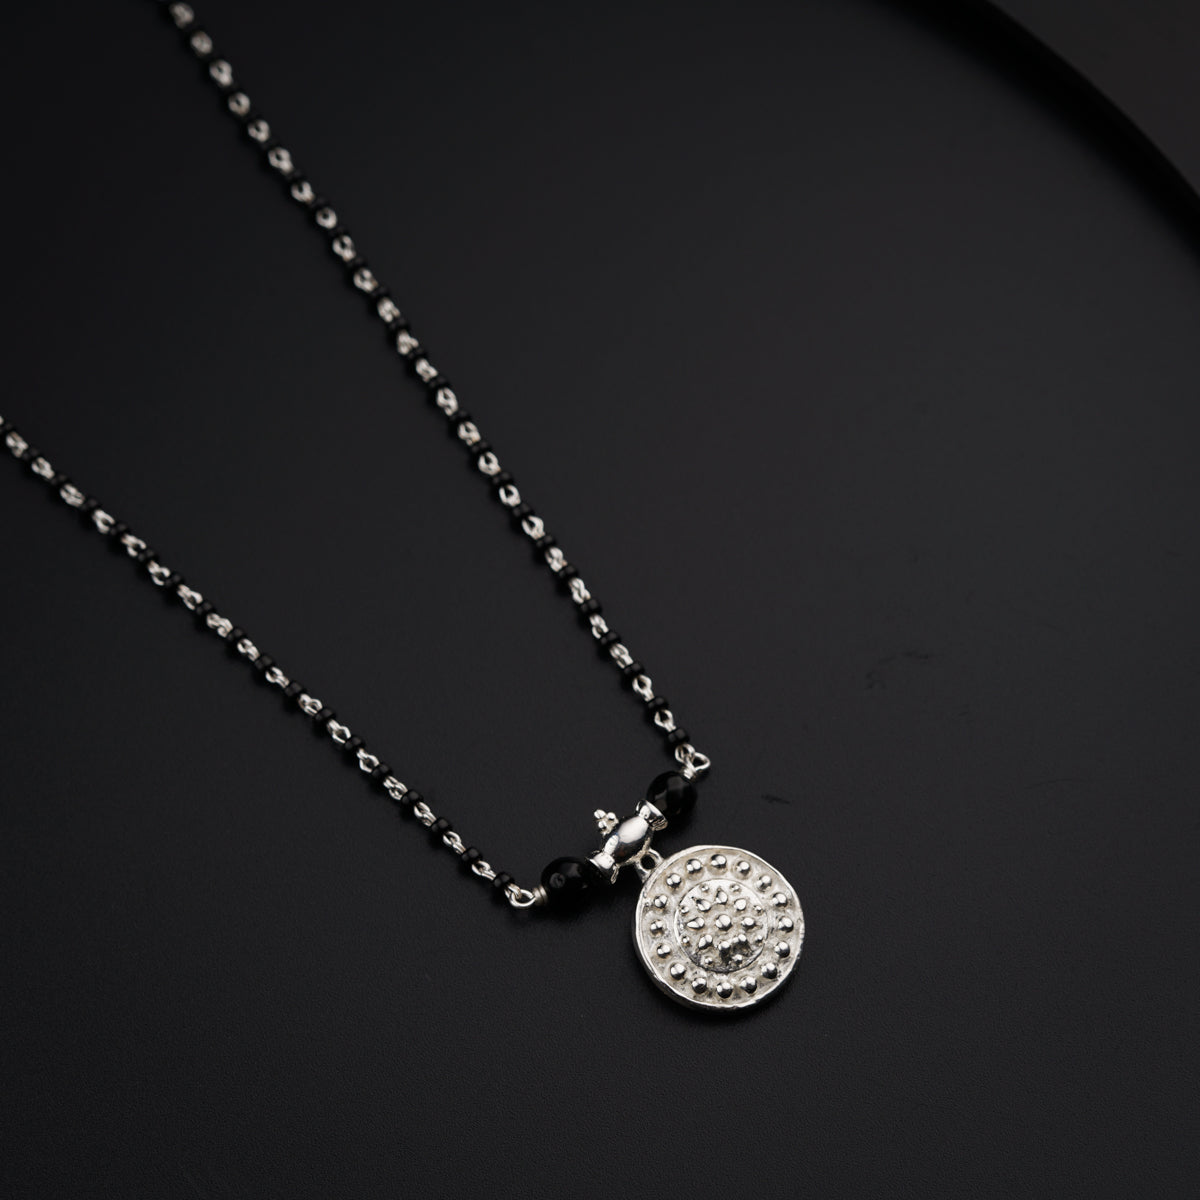 a necklace with a medallion on a black surface